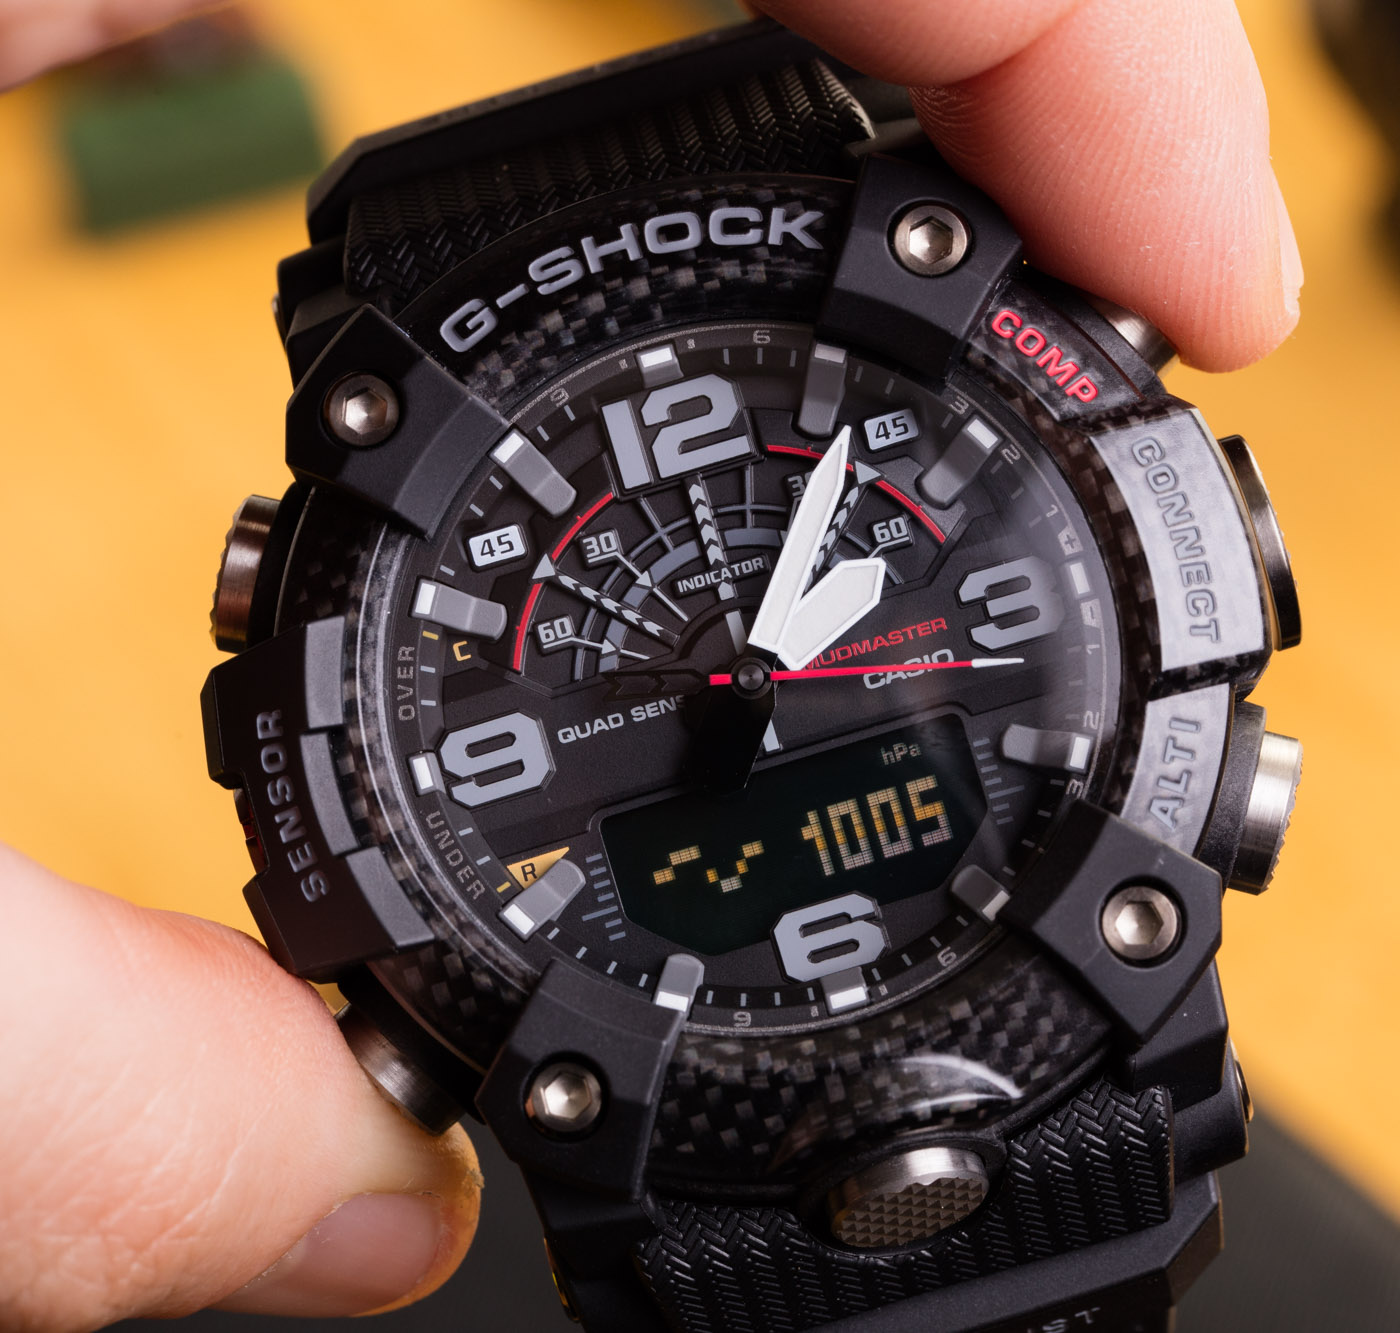 Casio G-Shock Mudmaster GG-B100 Watch Review: Full Of Style, Value